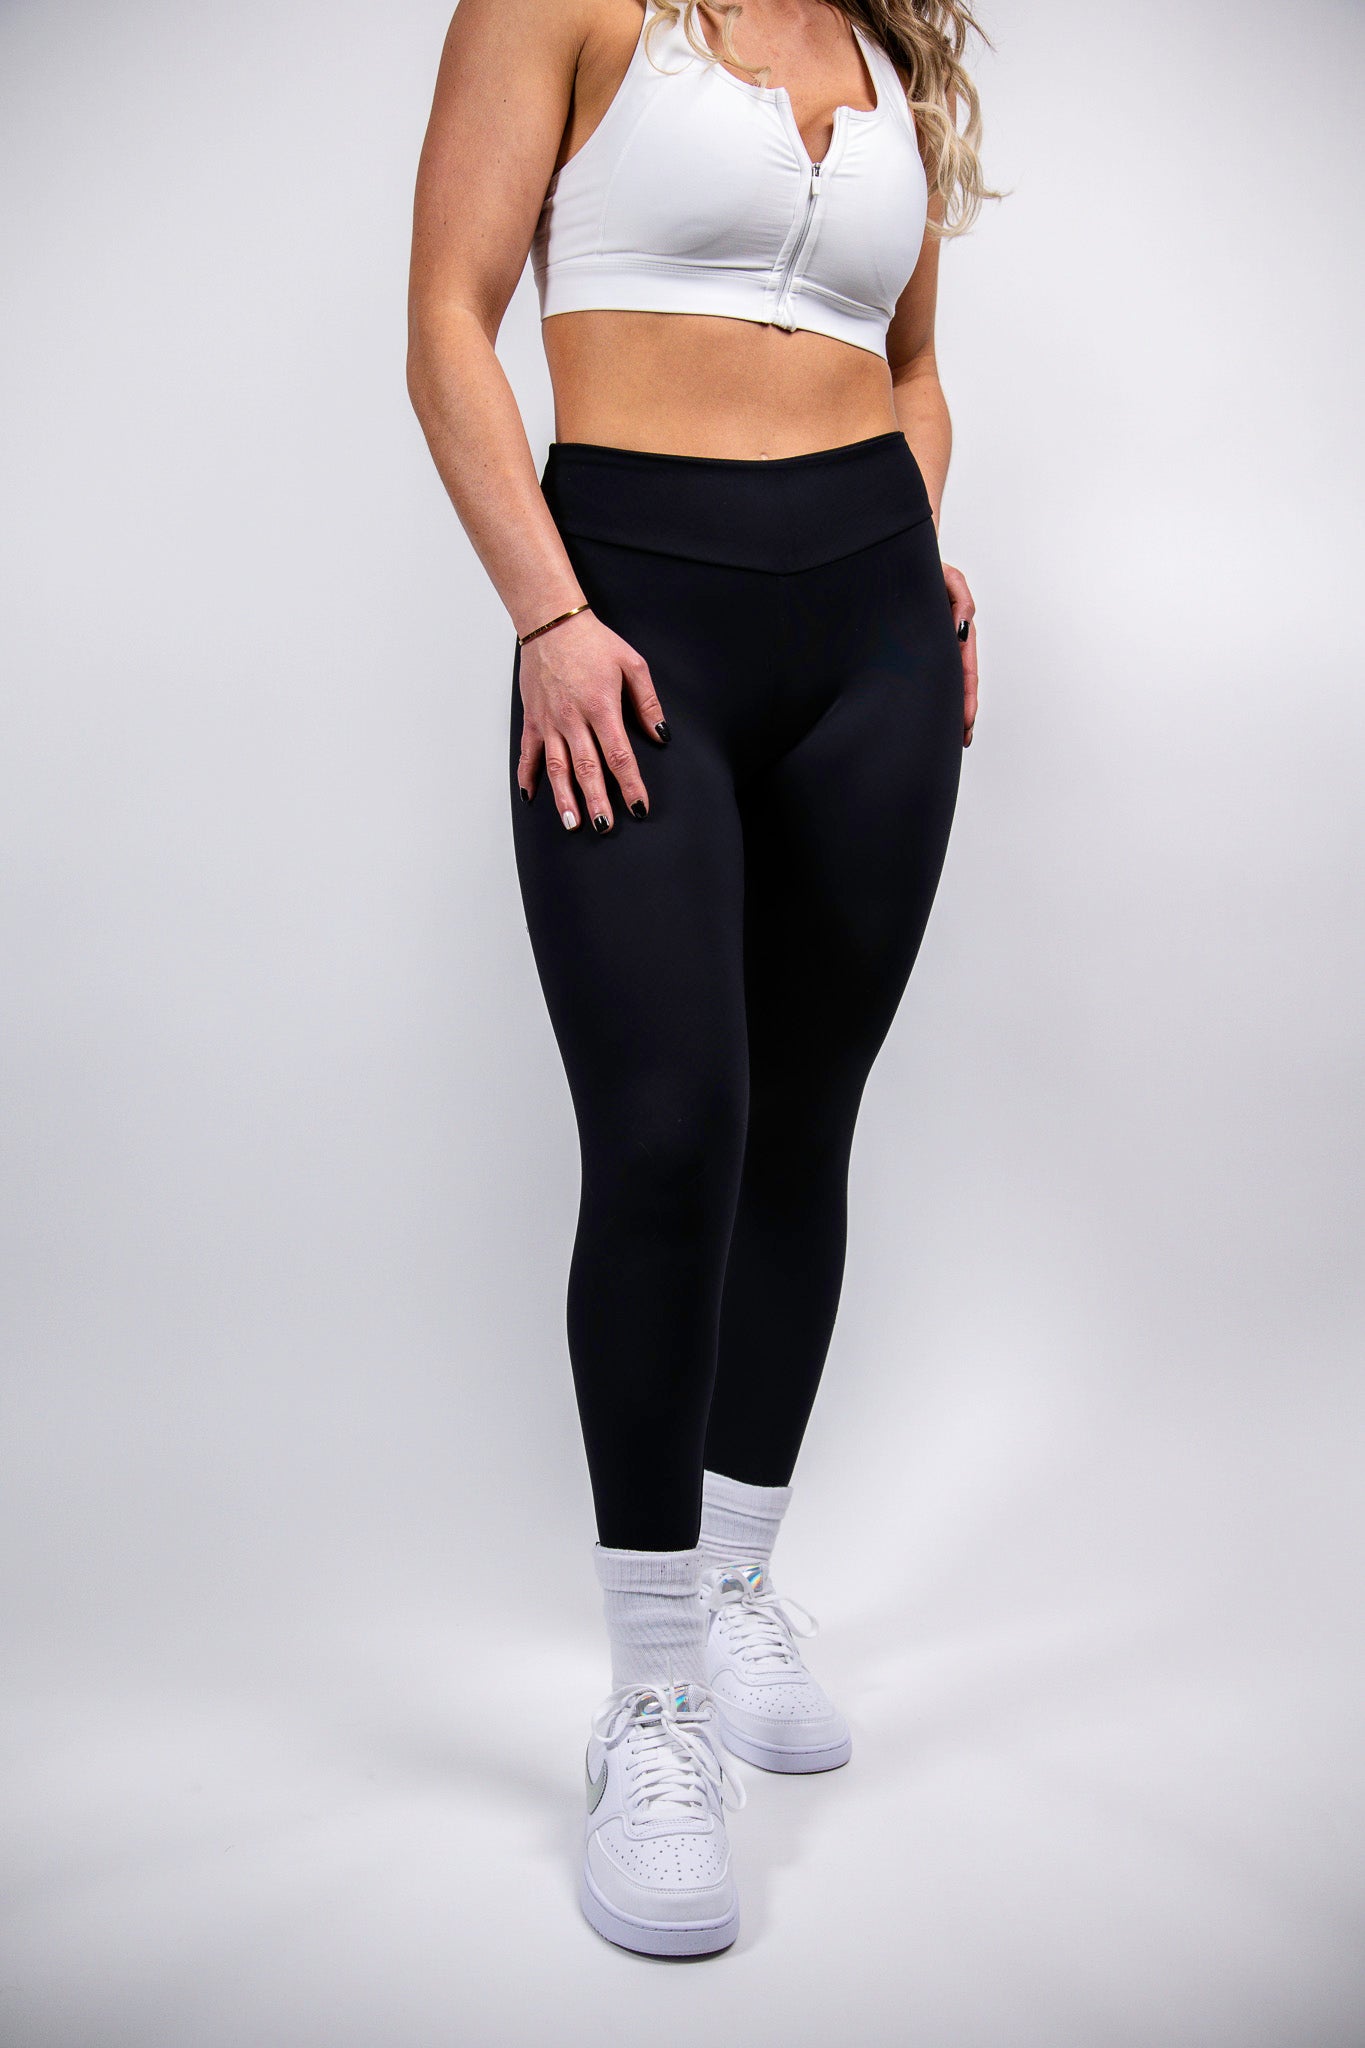 Zenergy by Chico's Black Leggings Size XL (3) - 60% off